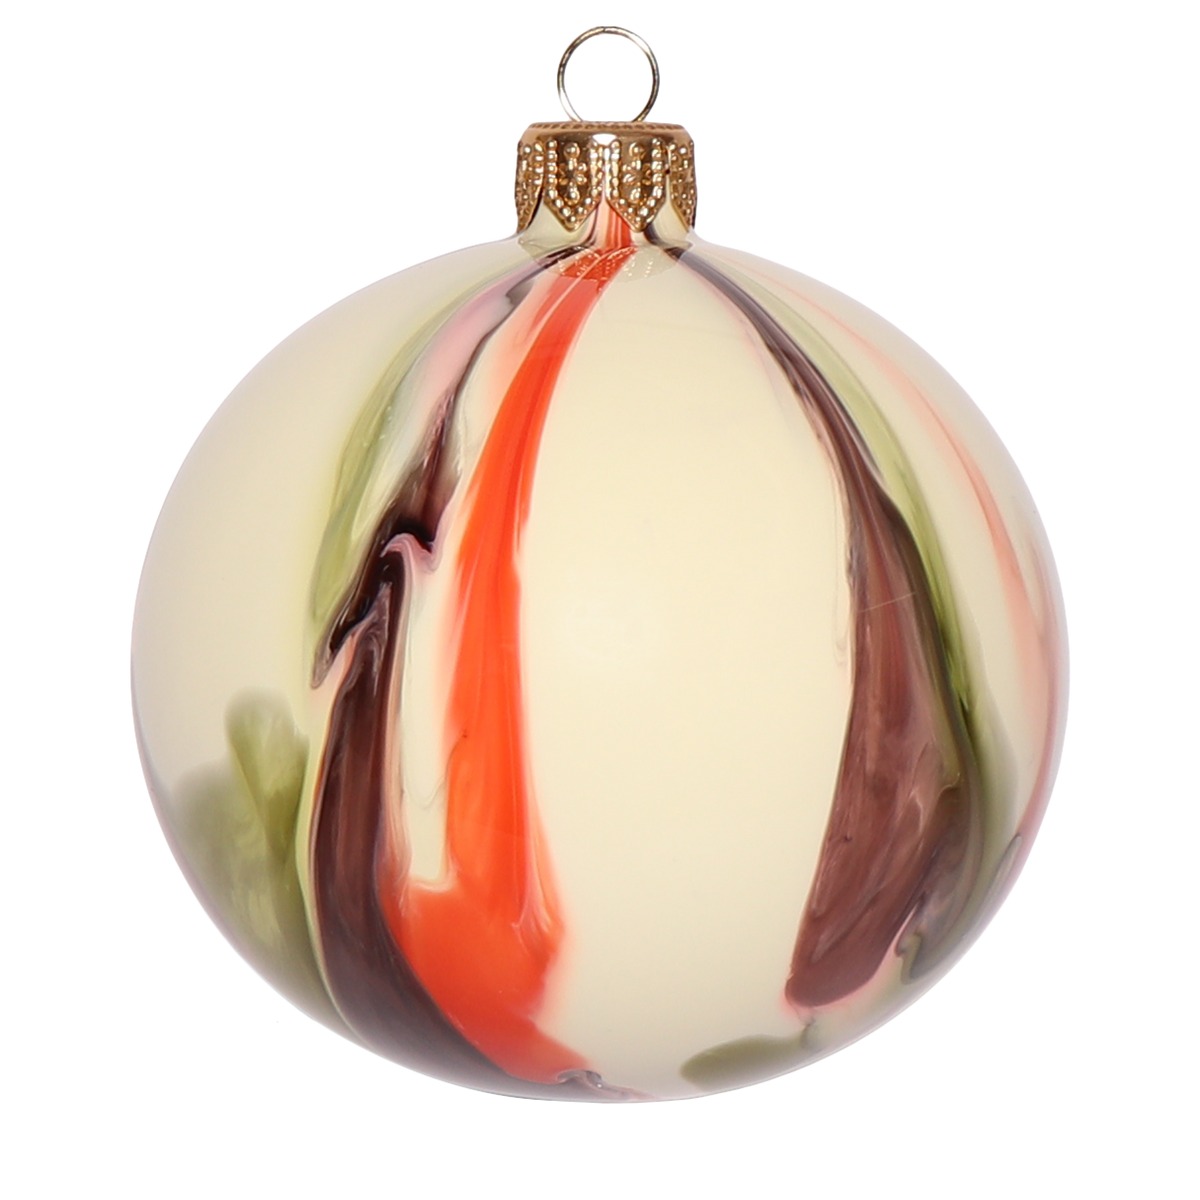 Marble Effect Ornament Bauble, 8cm Olive/Red/Brown